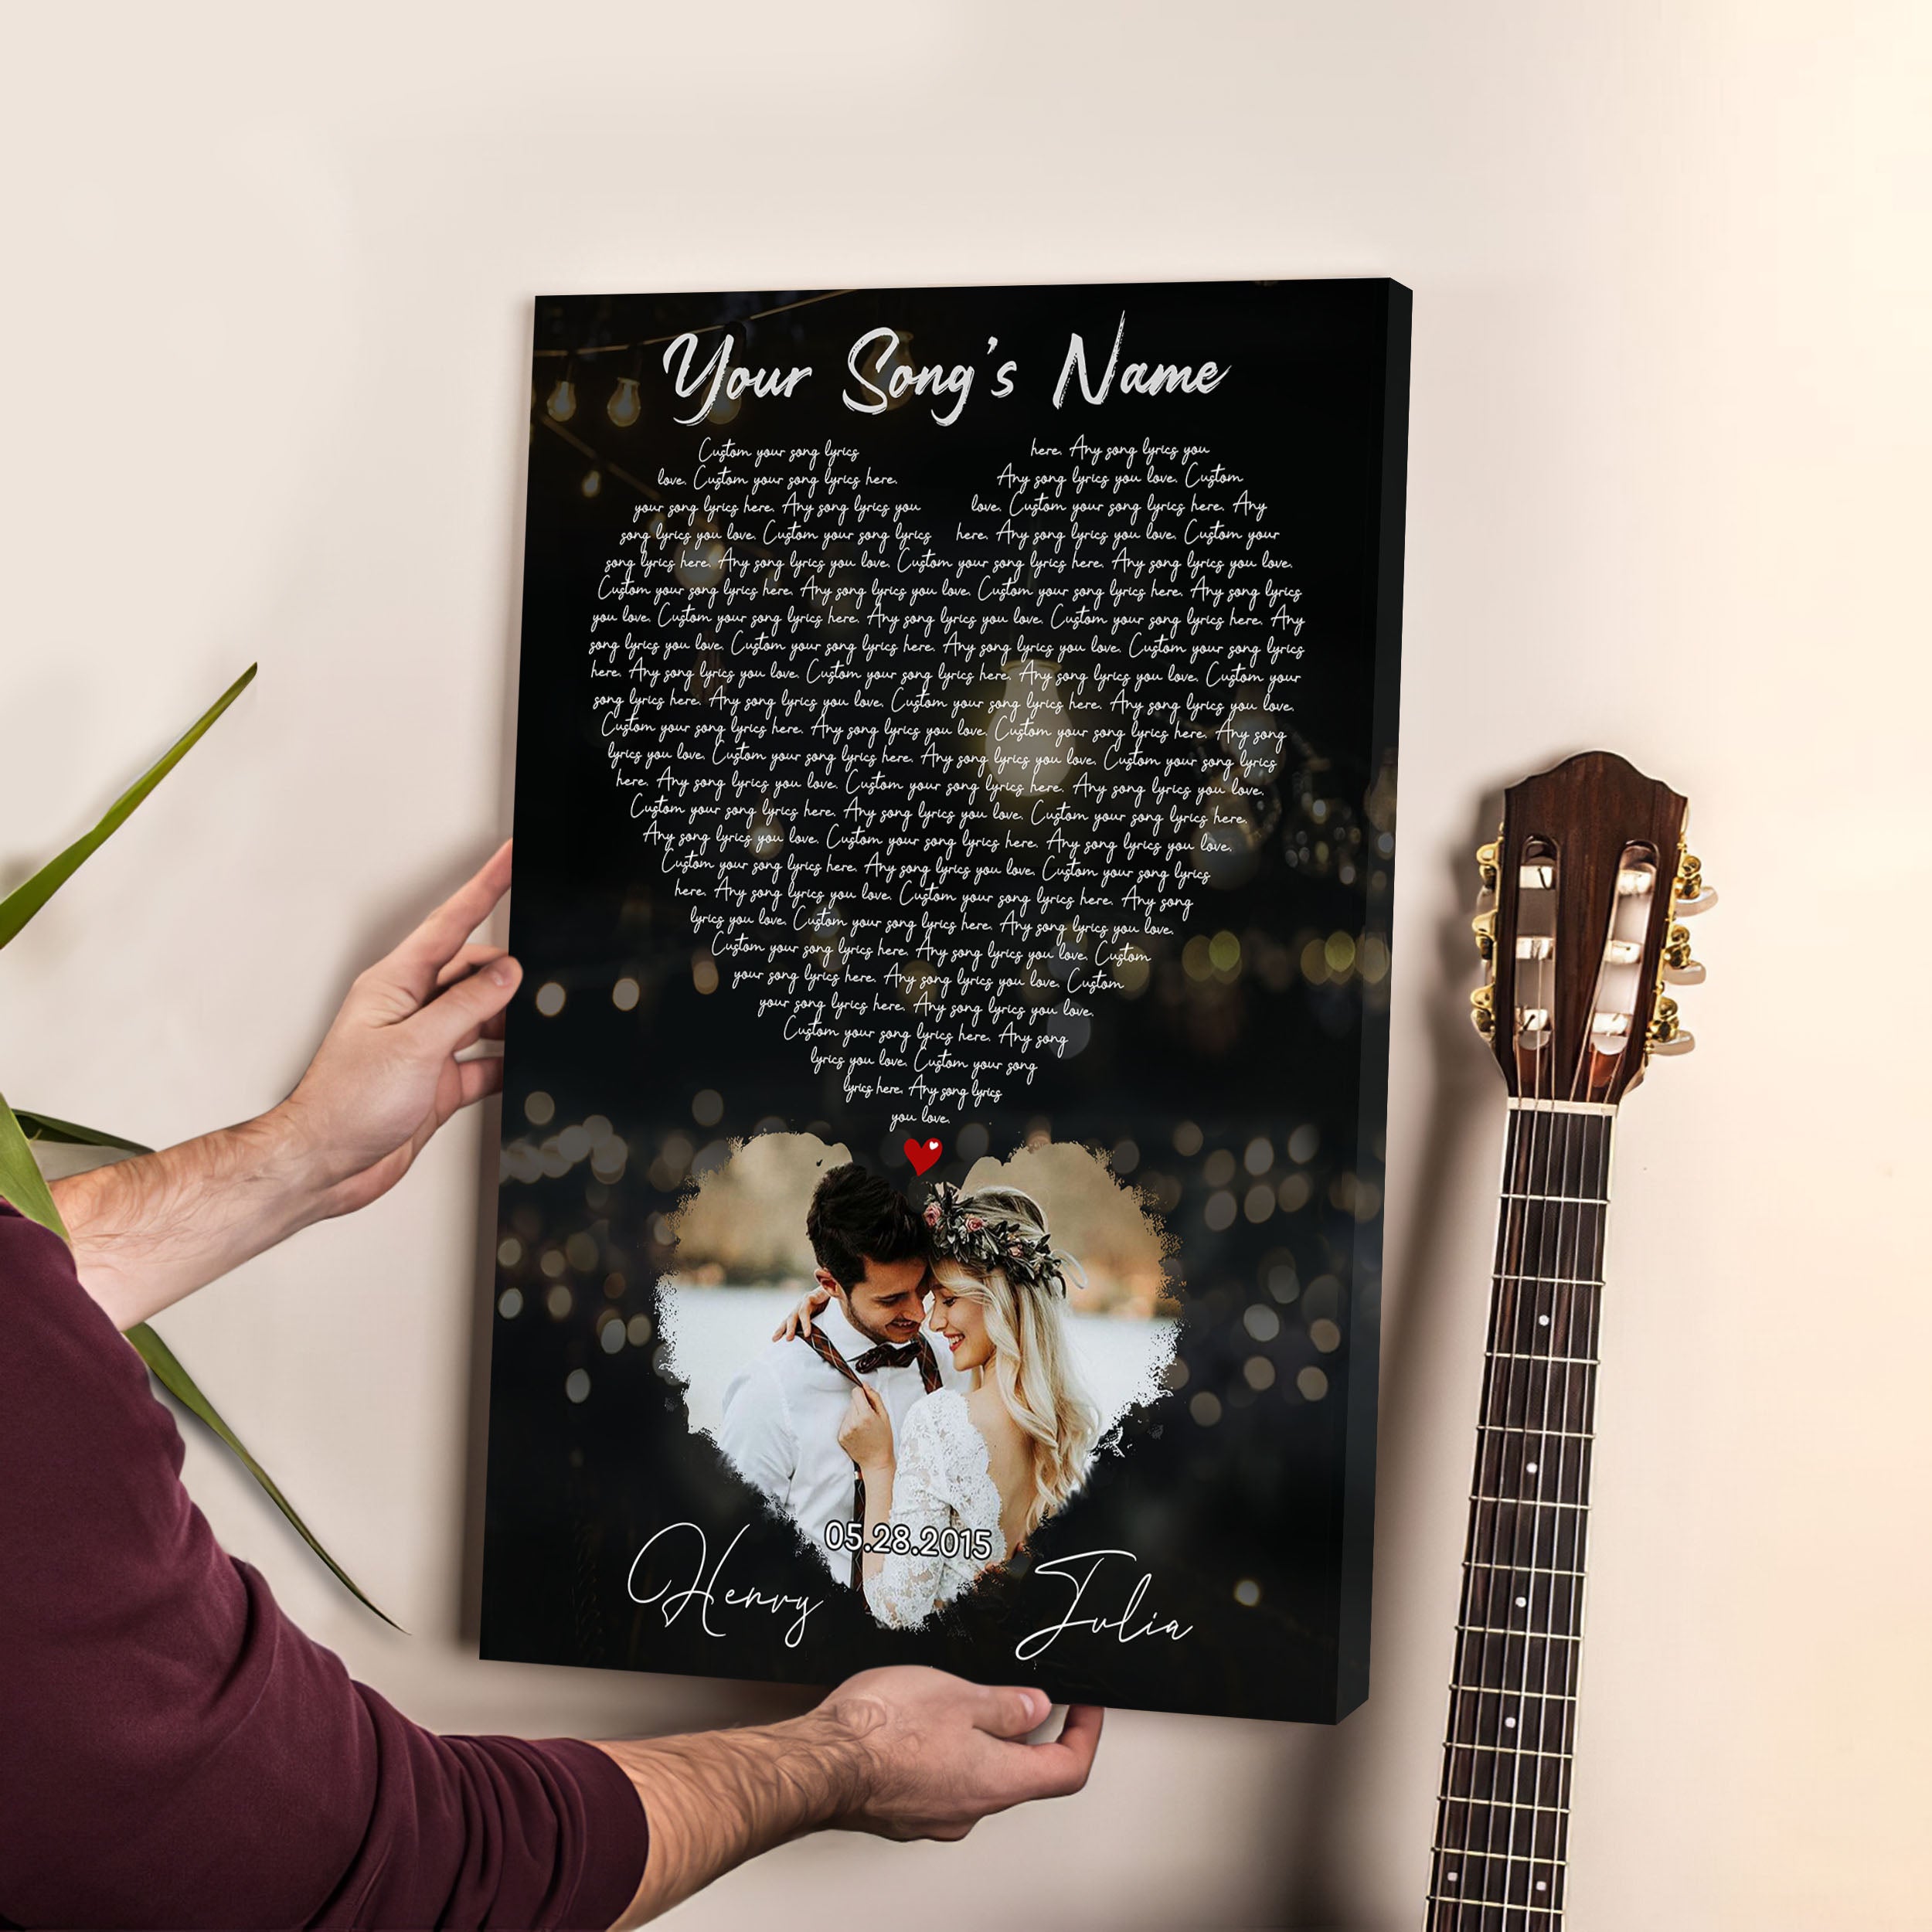 Personalized Gift for Couple, Custom Music And Lyrics Print - Wedding Anniversary First Dance Song Lyrics Poster, Wall Art Decor, Music Poster Couples Gifts for Him Image Photo